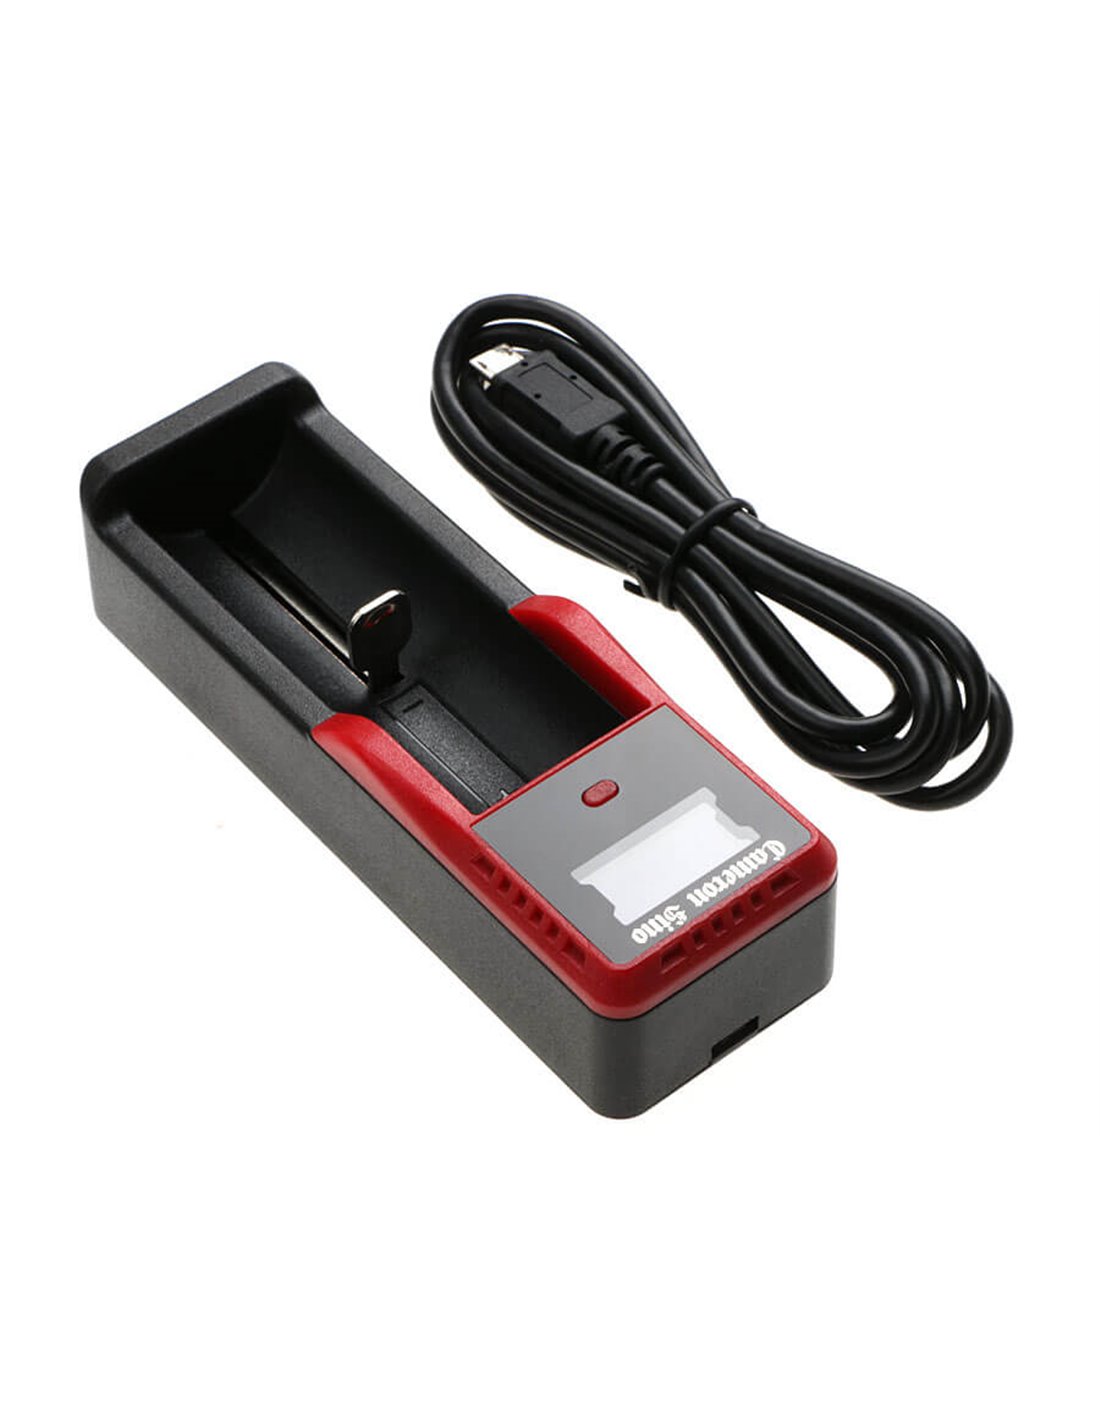 USB Single Slot Charger for AA, AAA 18650 Charges NiMh & Lithium Ion Cells